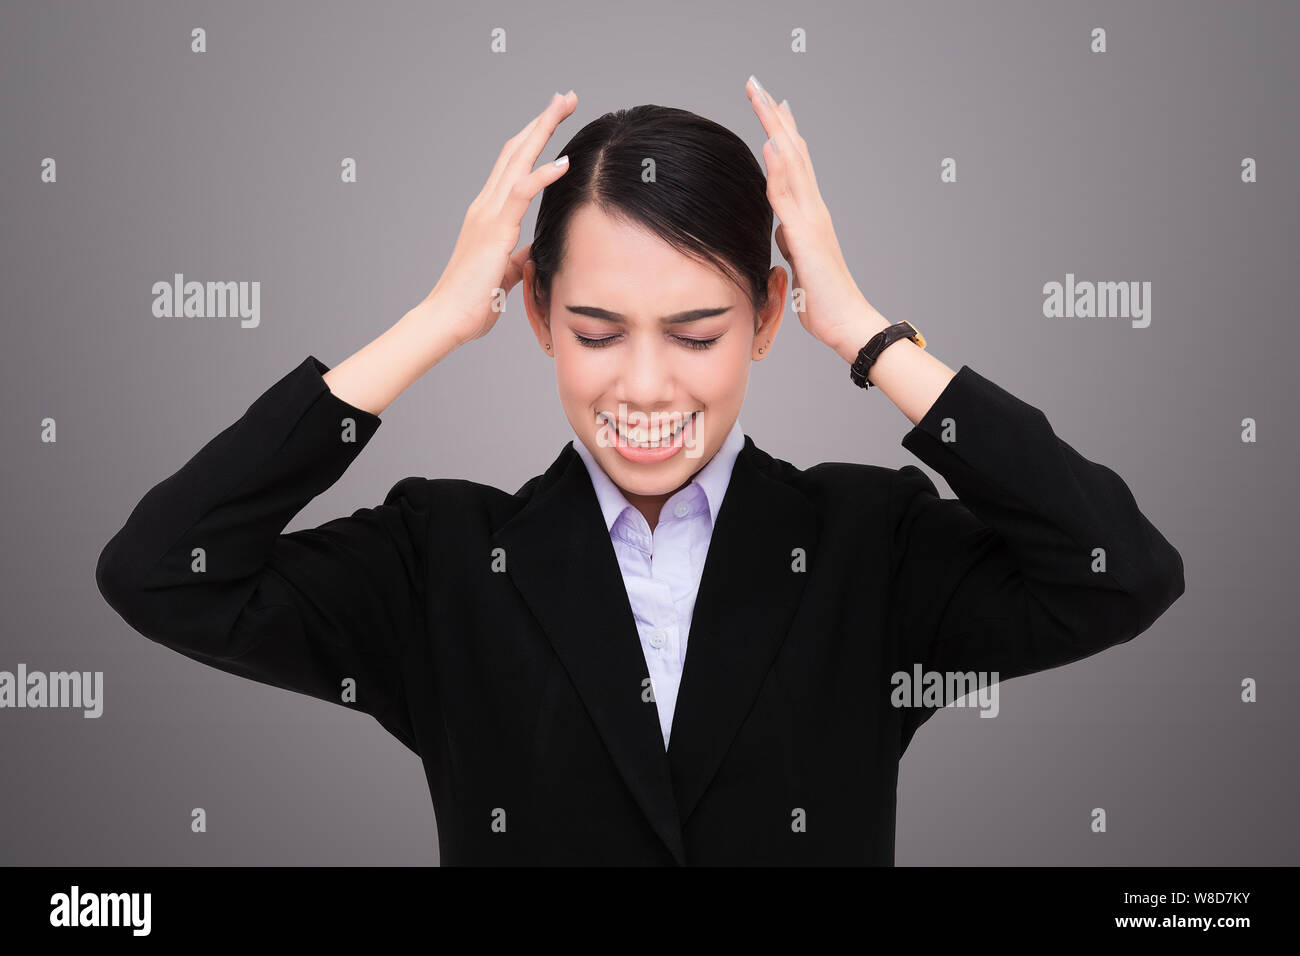 Young woman making a mistake on a gray background Stock Photo